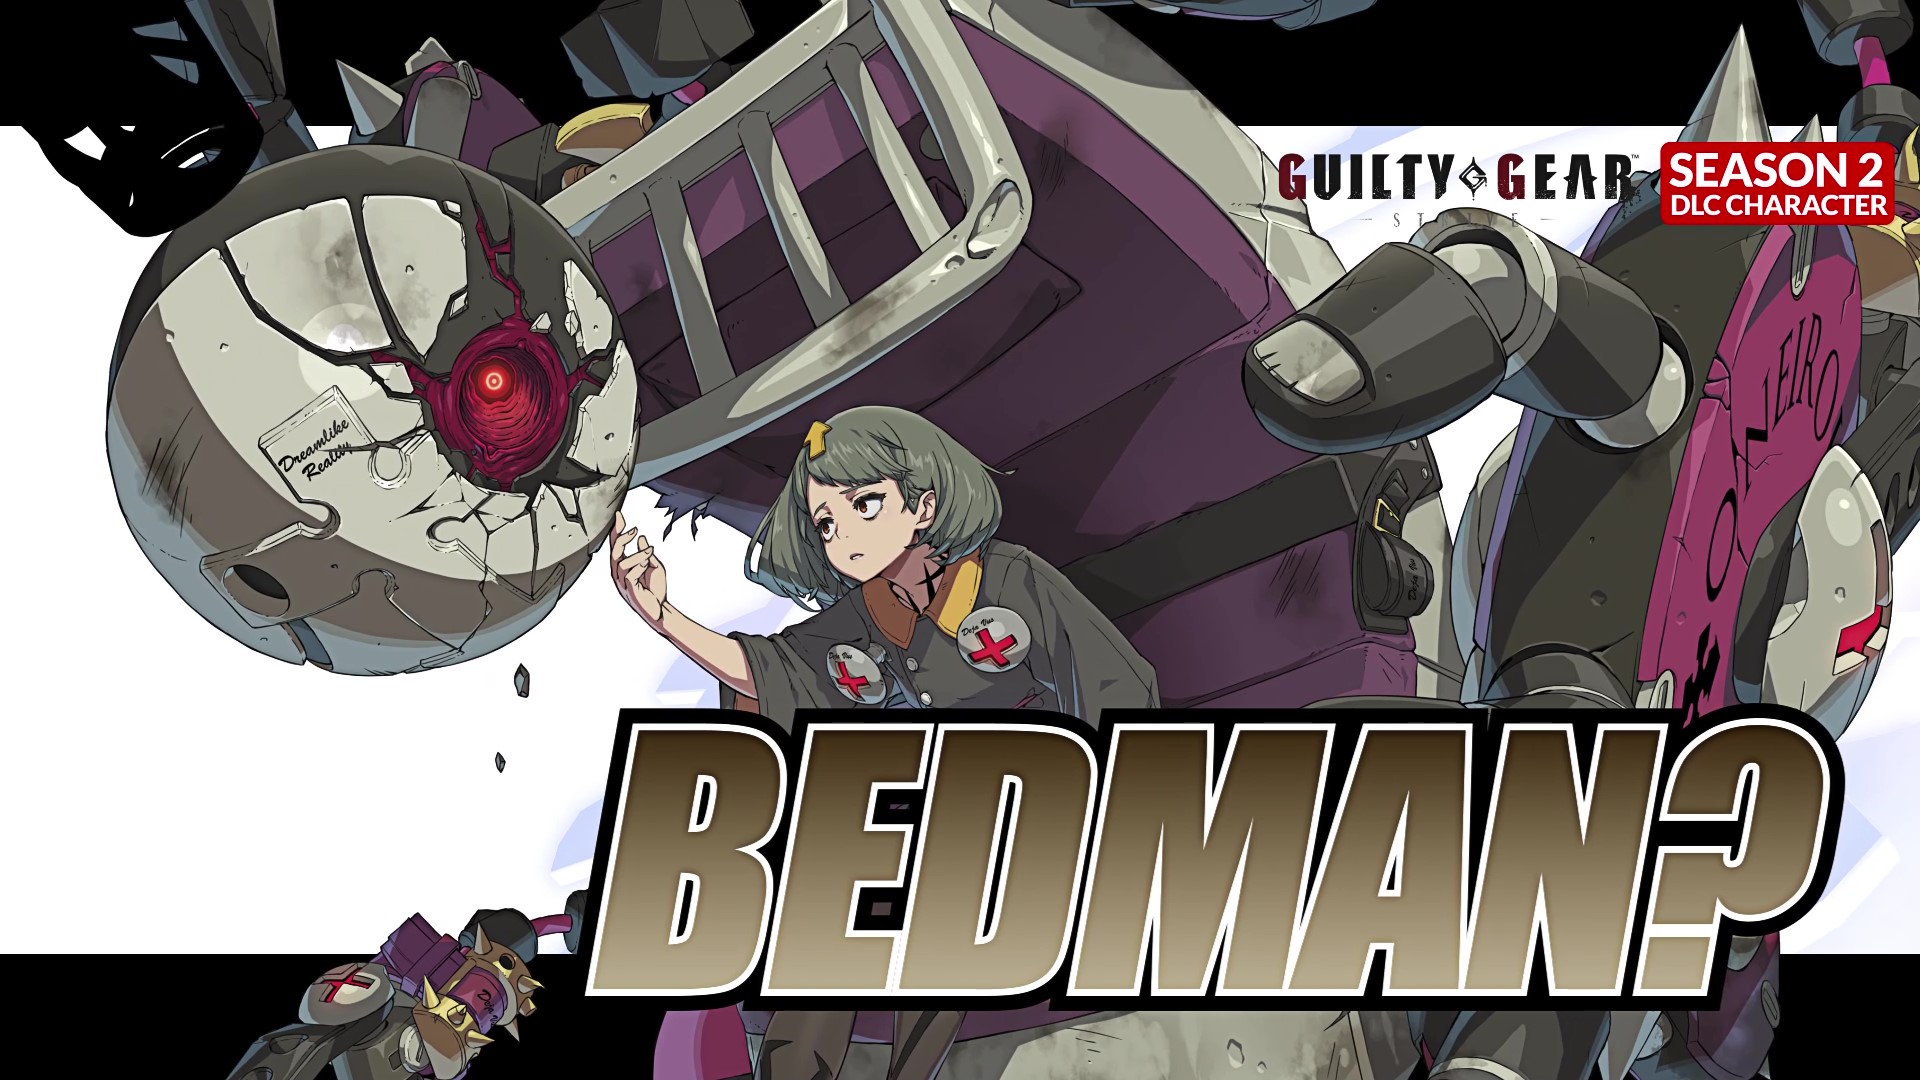 “BEDMAN?” NOW AVAILABLE